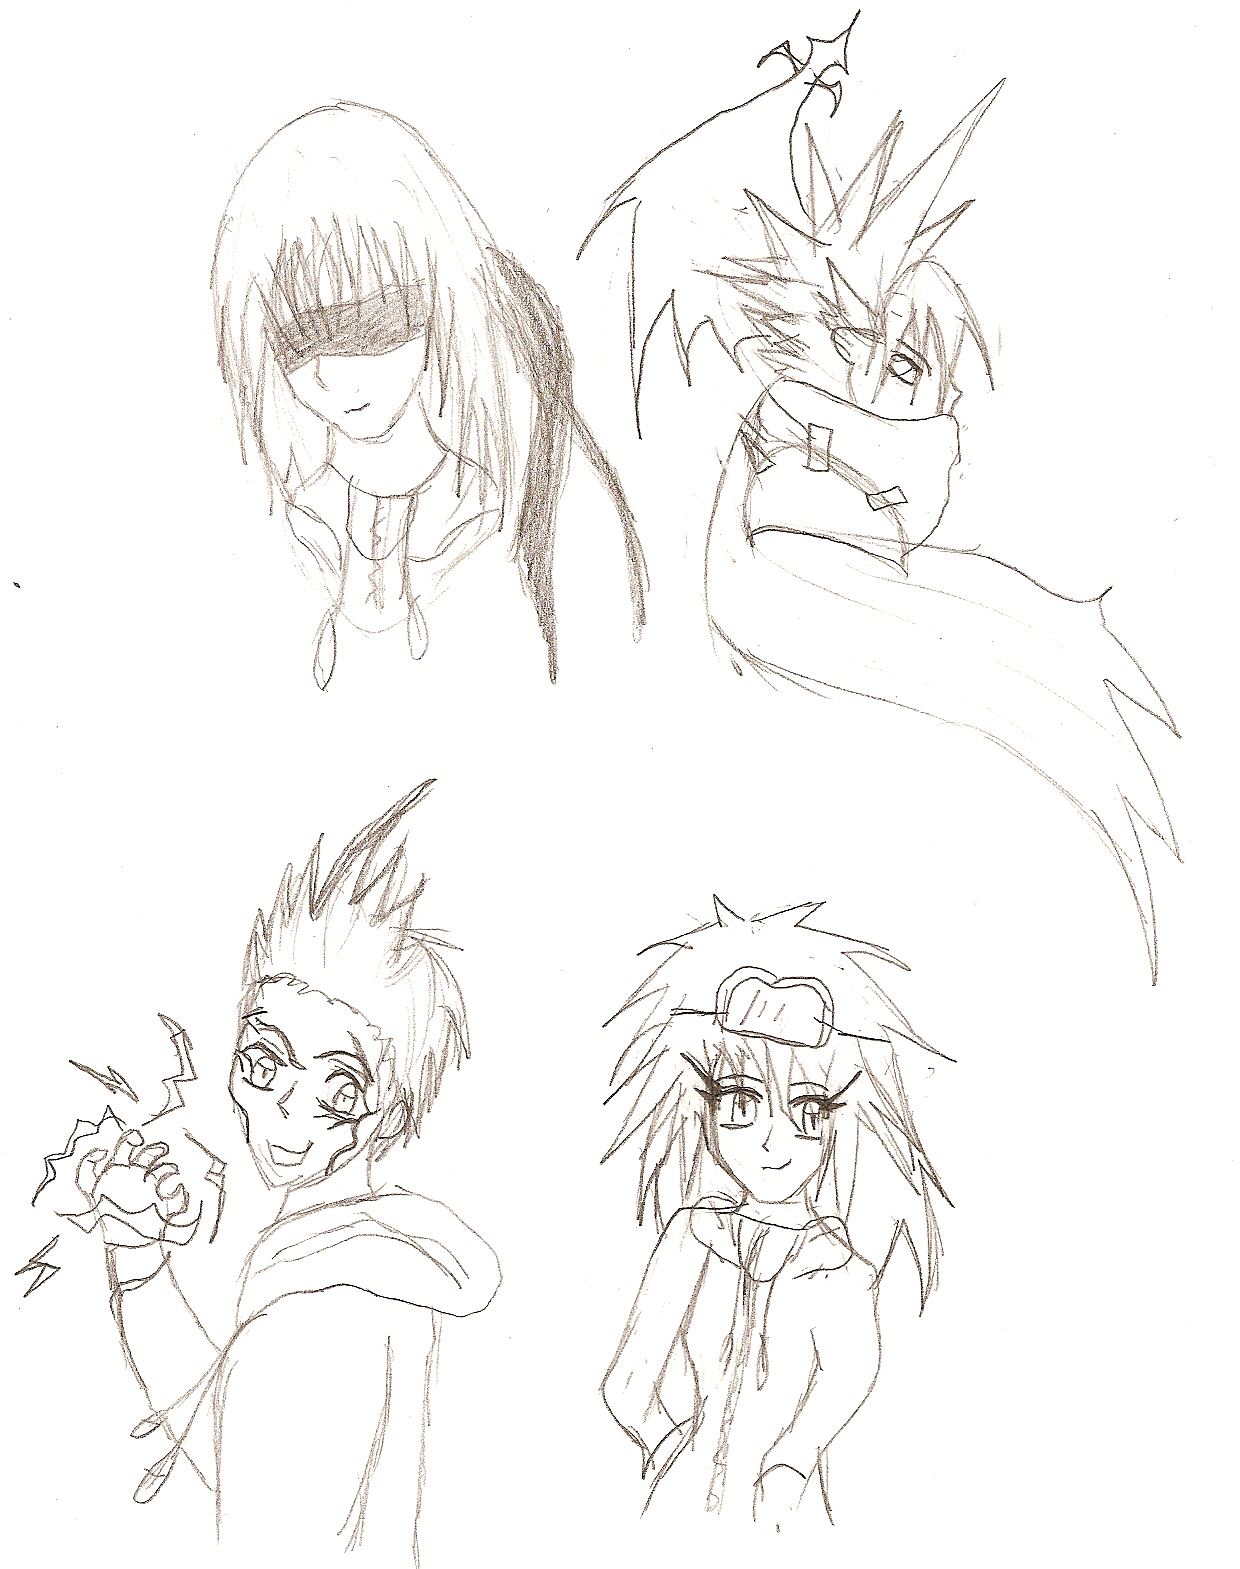 KH2 sketches by SweetxinsanityxSarah